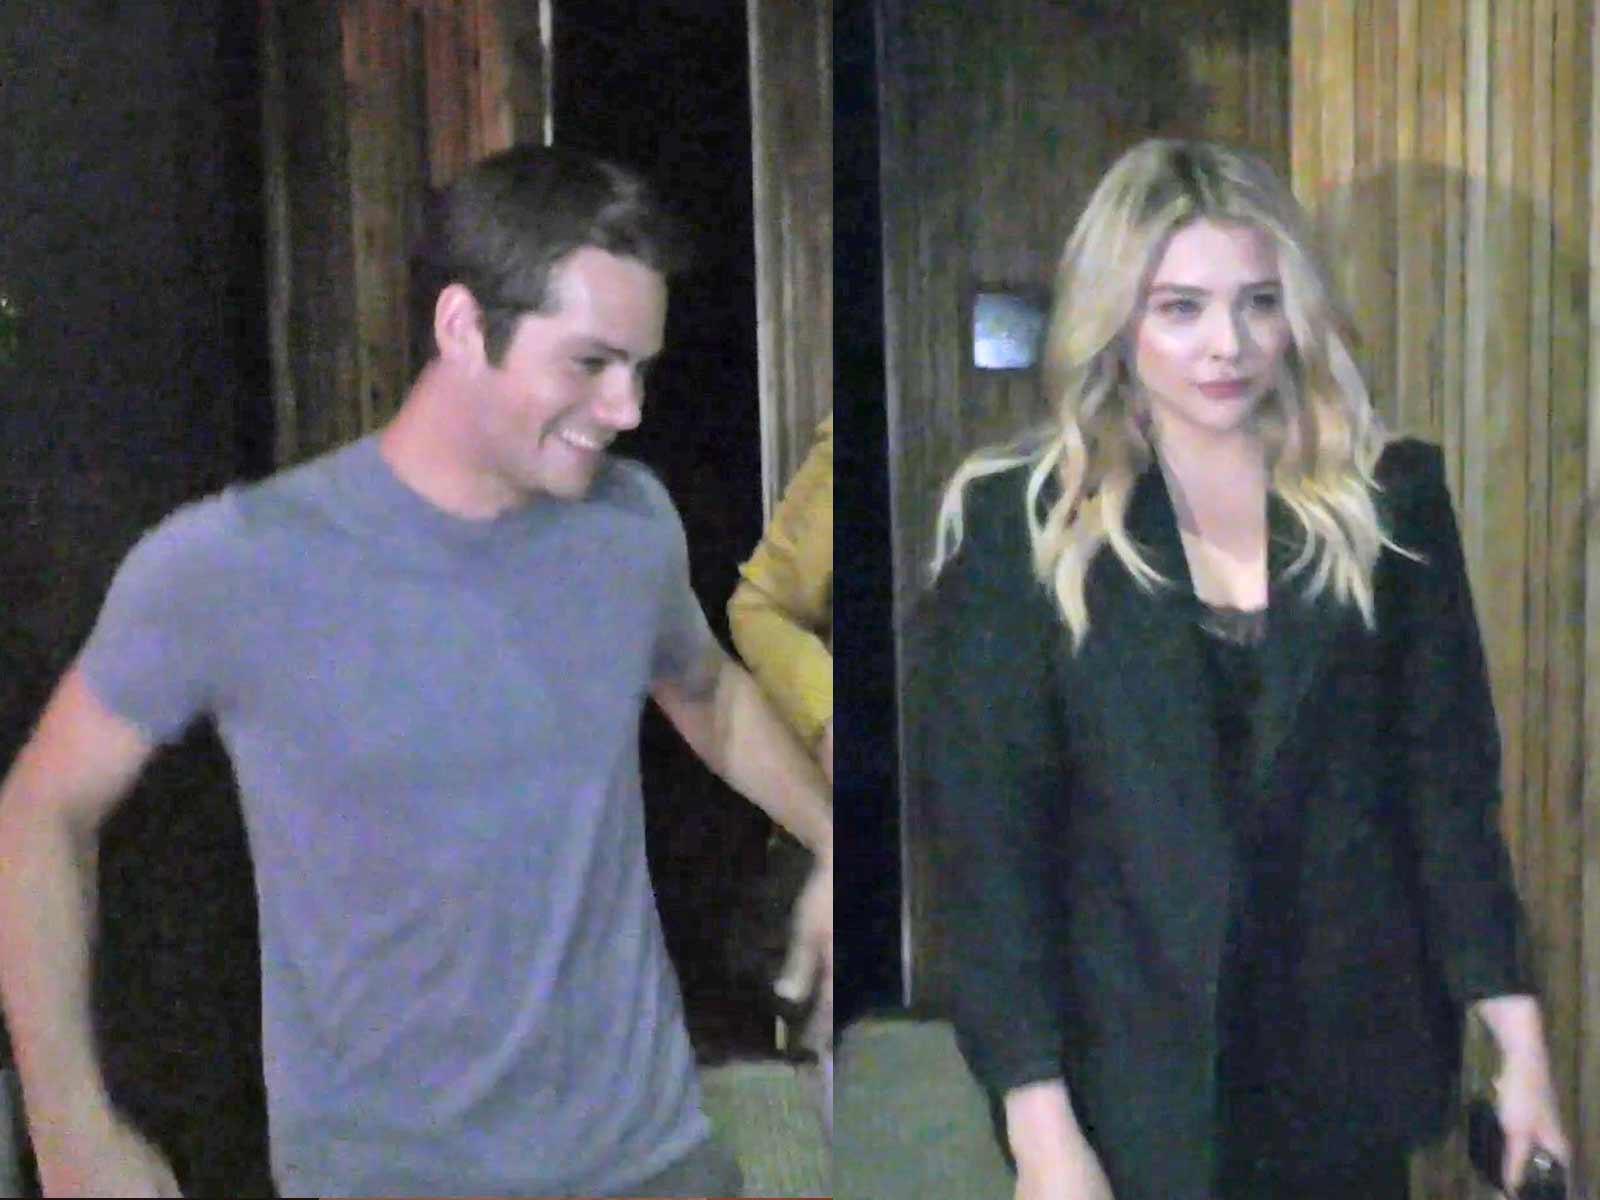 What Really Happened Between Chloe Grace Moretz And Dylan O'Brien?